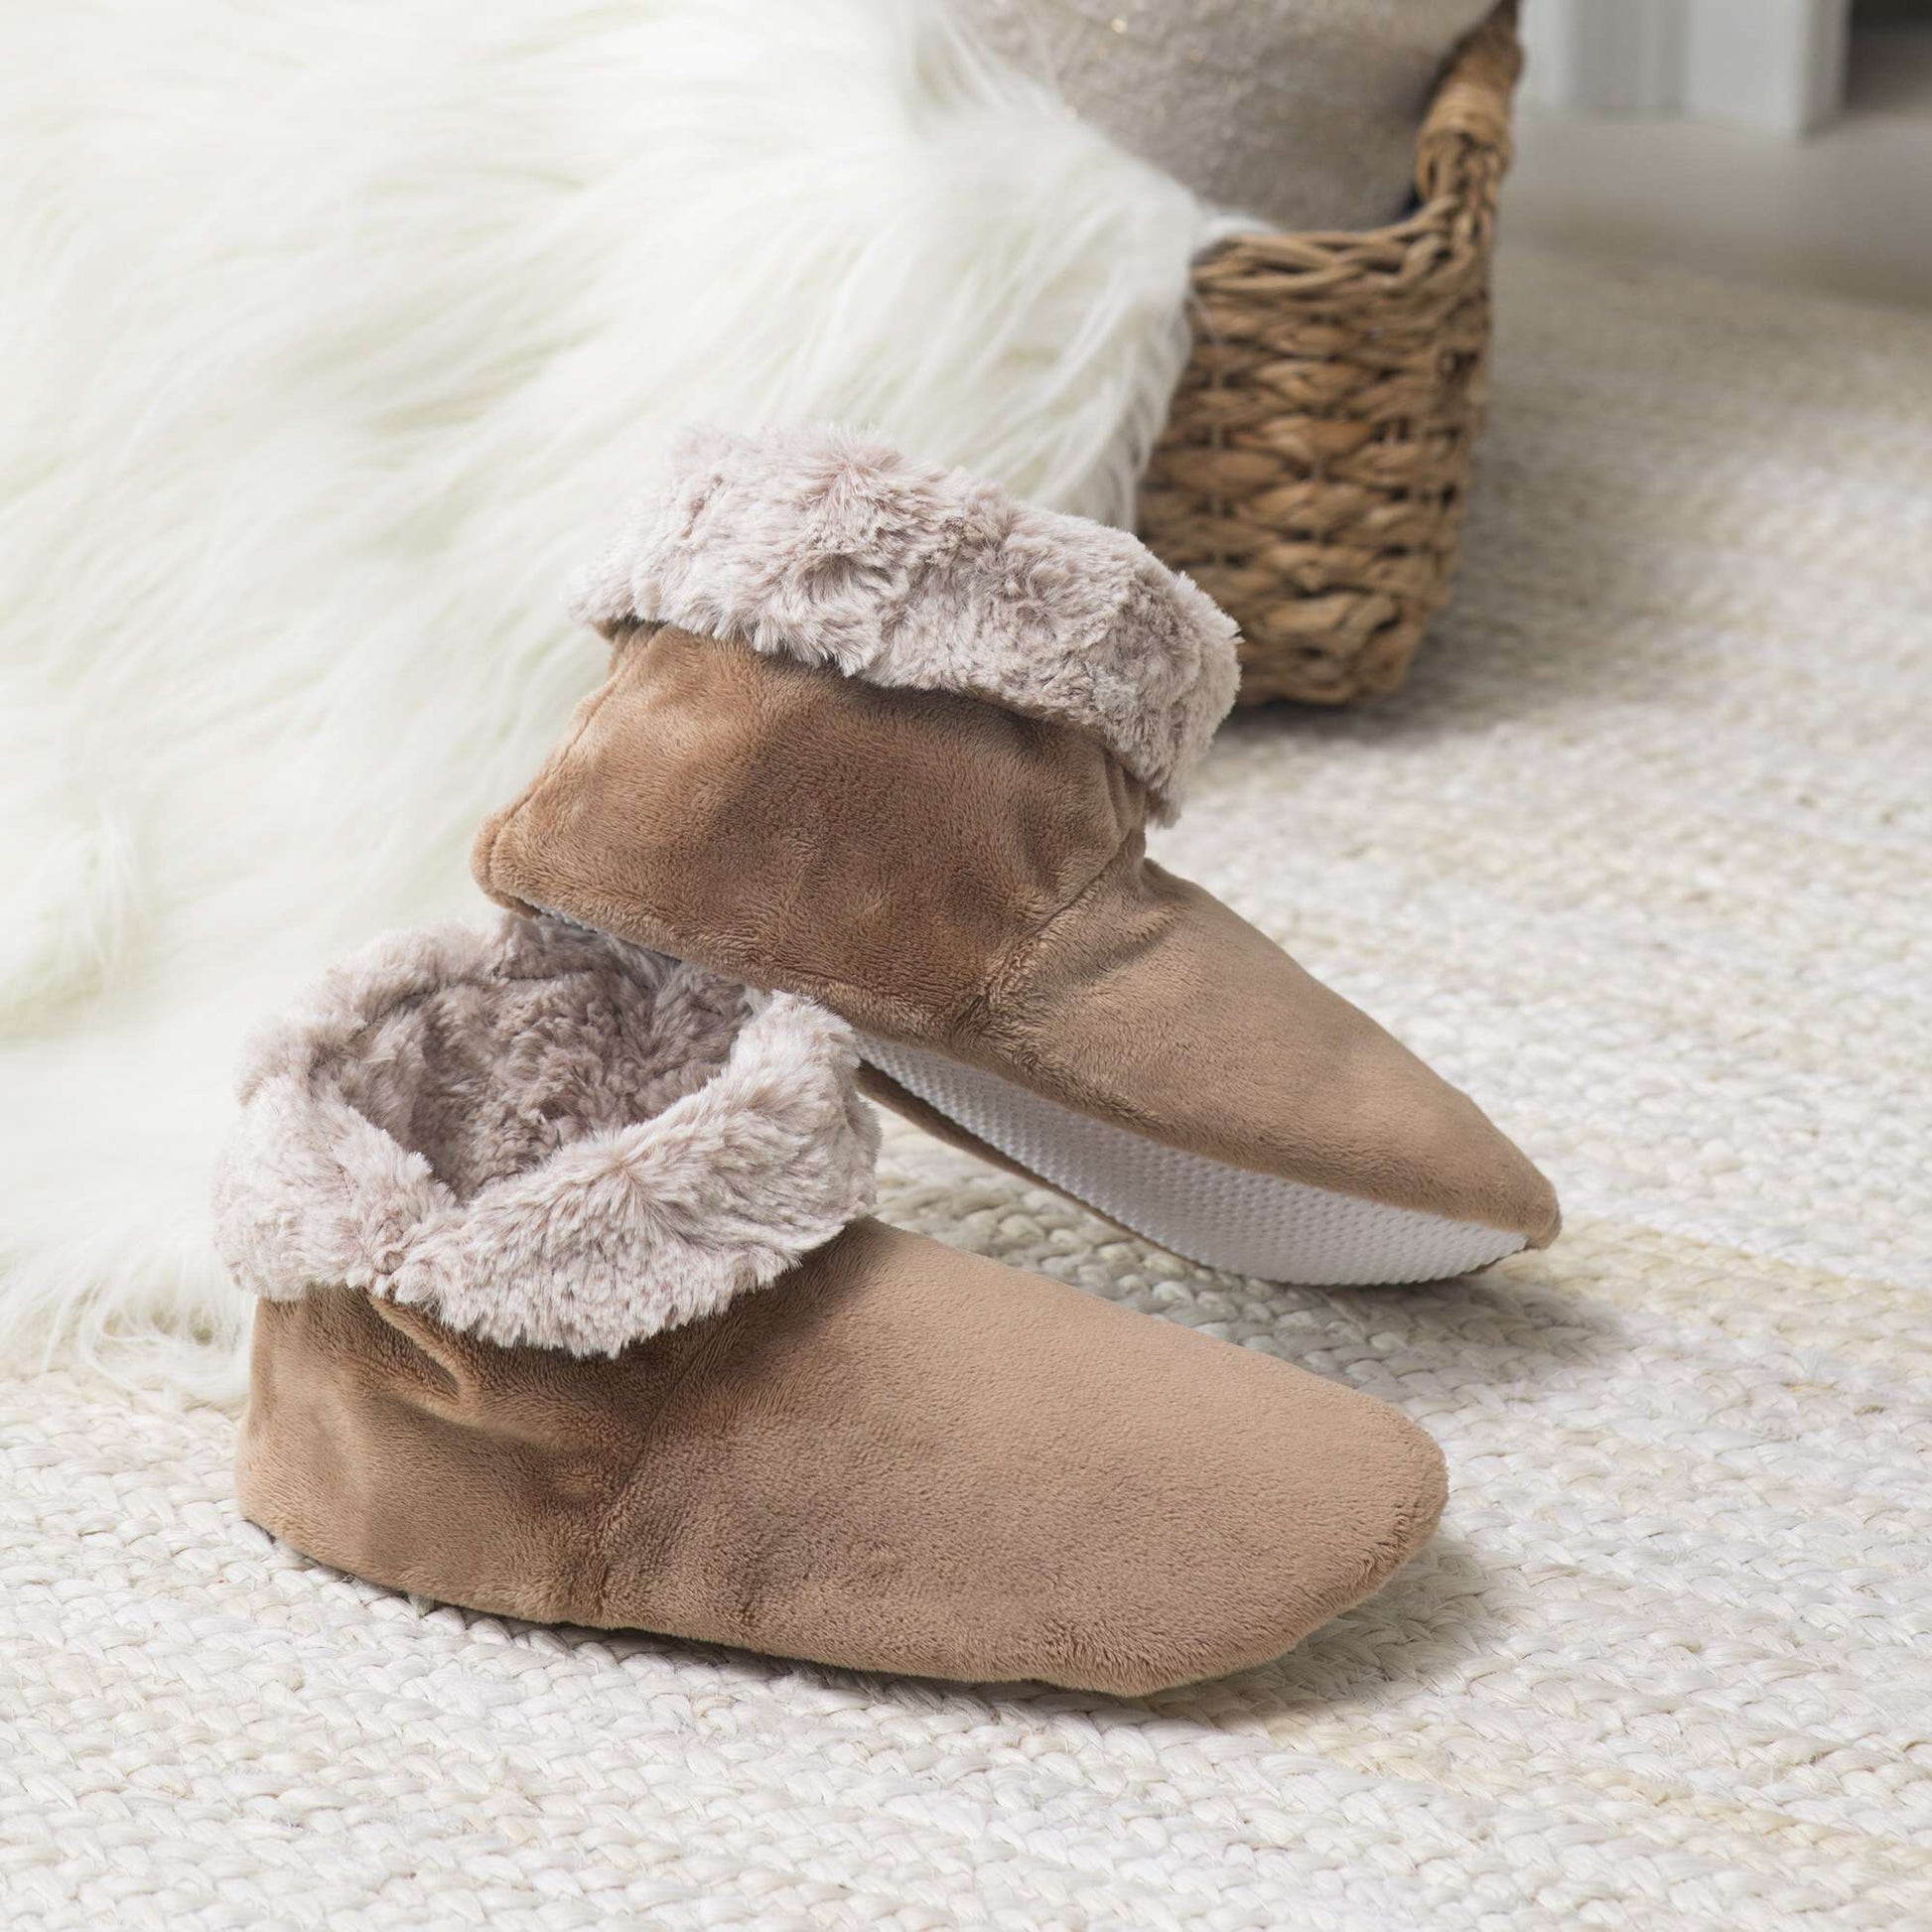 Free Coats Sewing & Clark Sew Cozy Boot Slippers Using Faux Fur Pattern